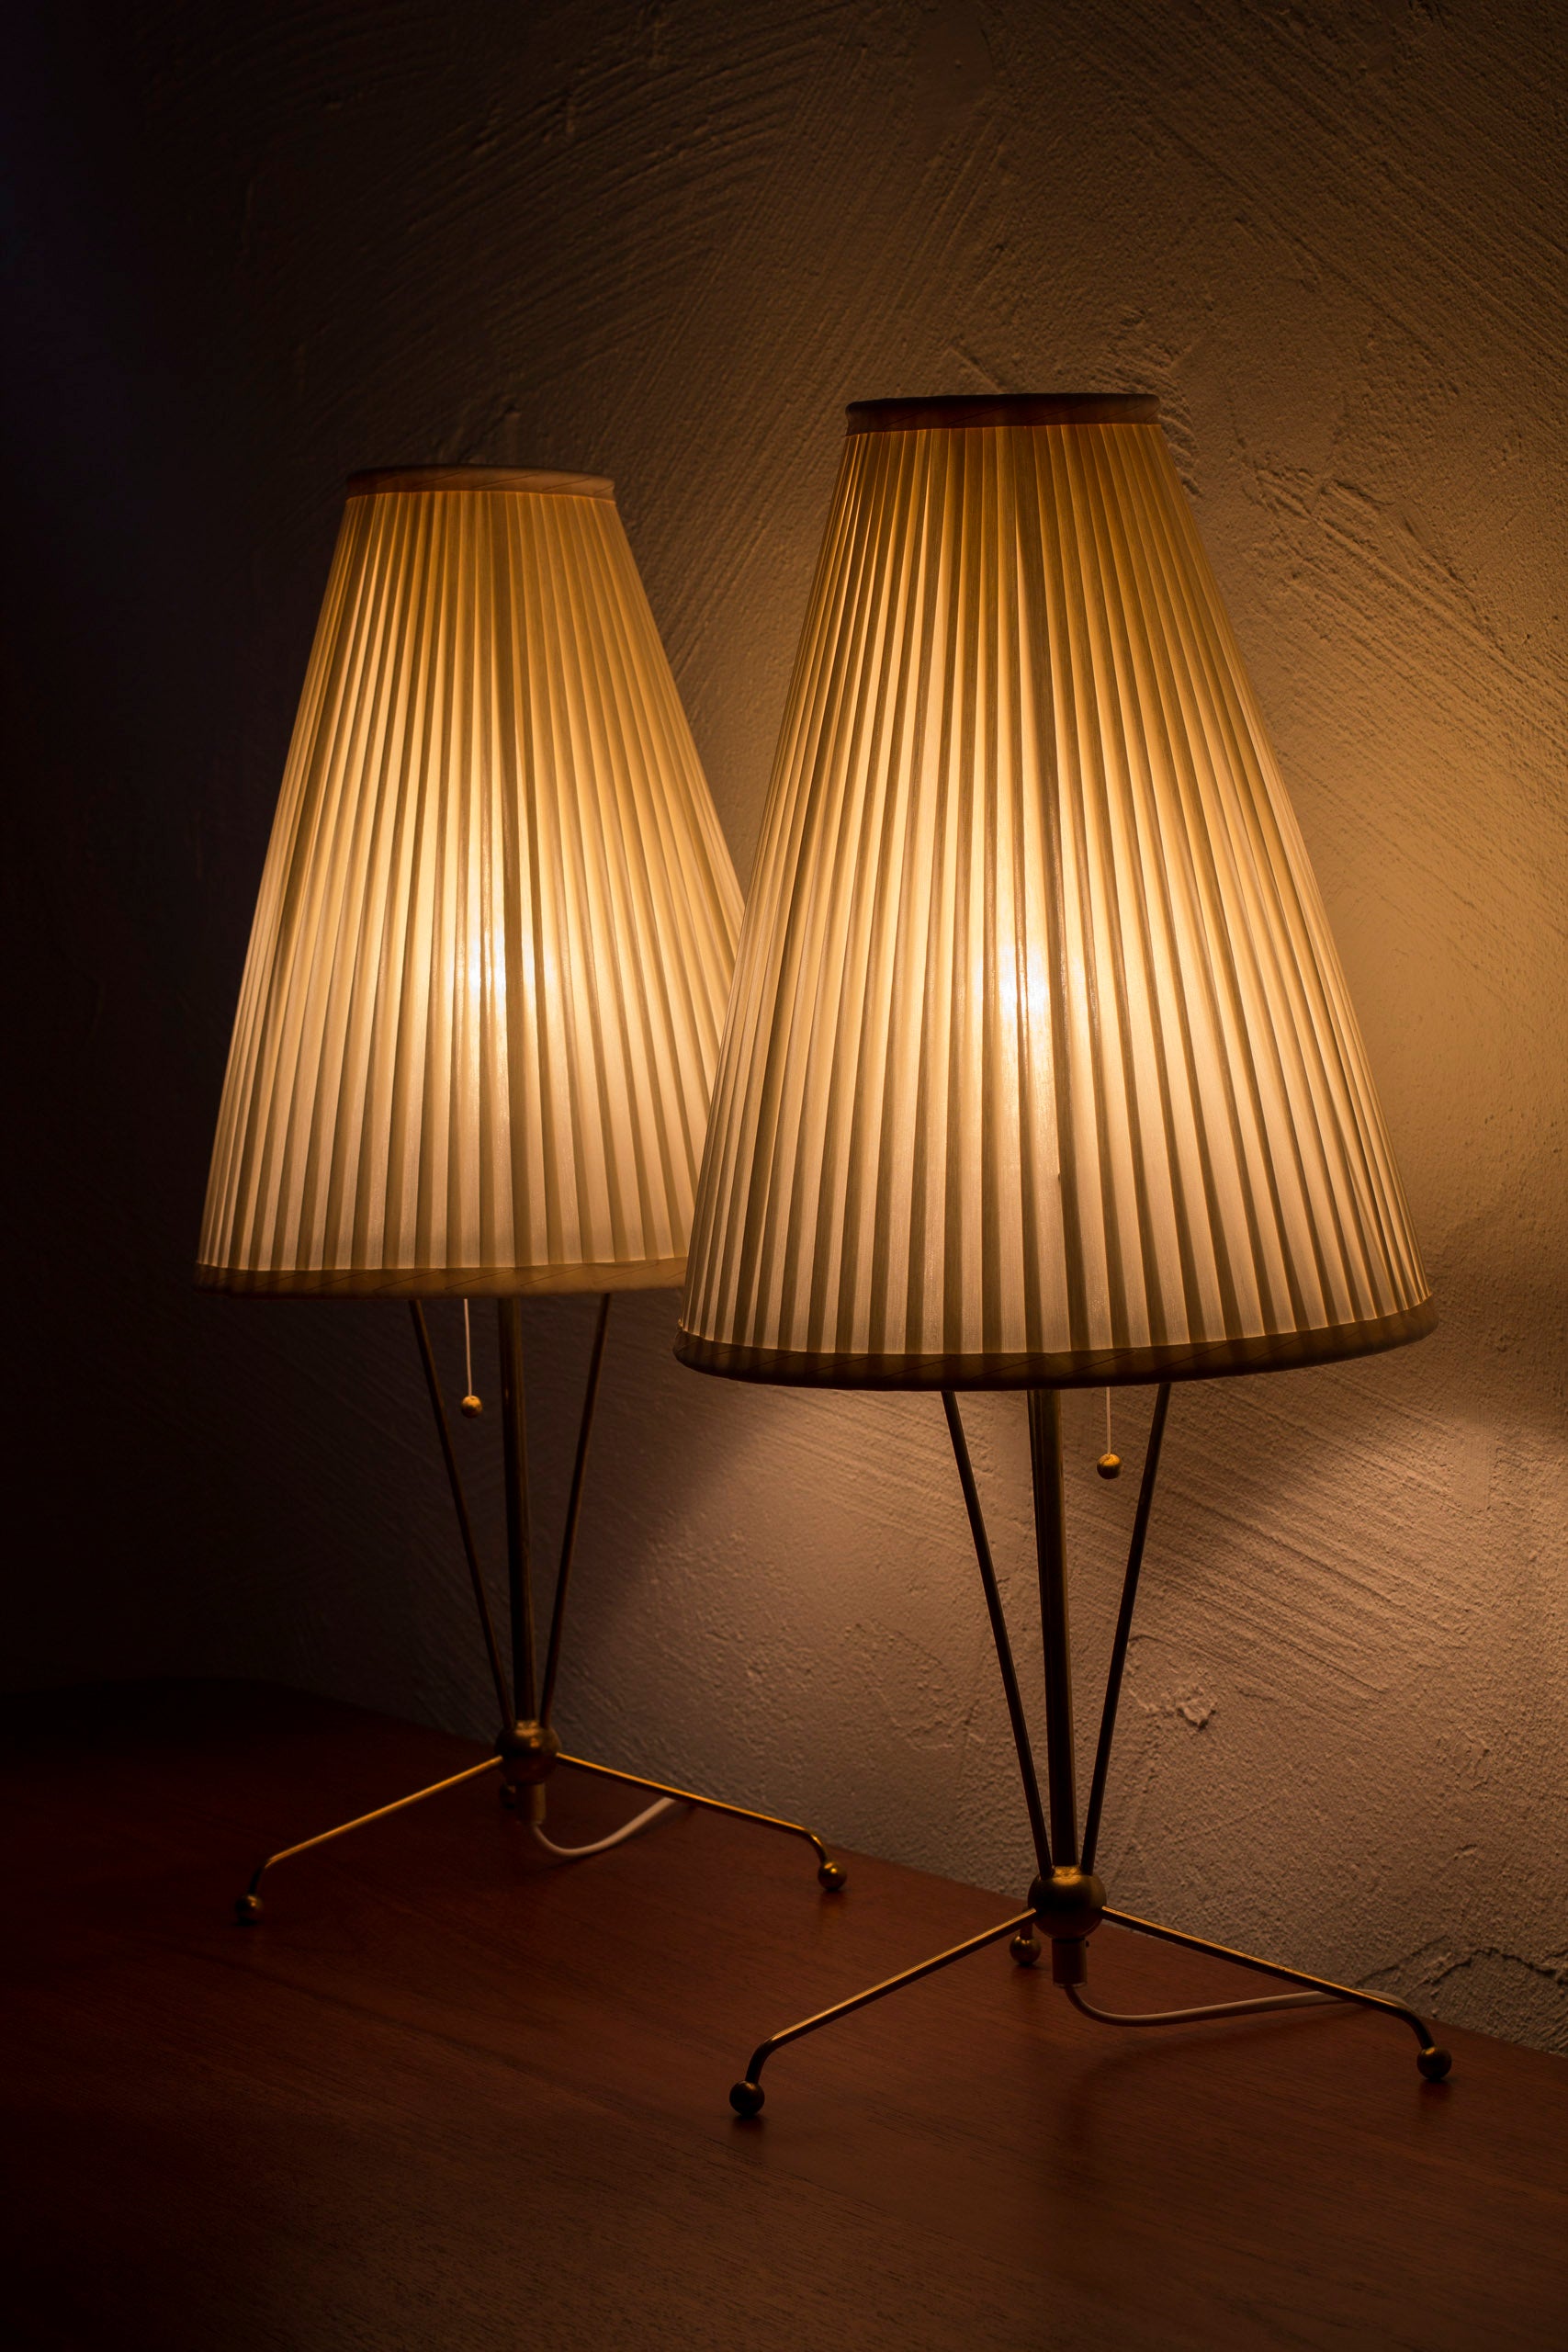 Pair of table lamps by ASEA